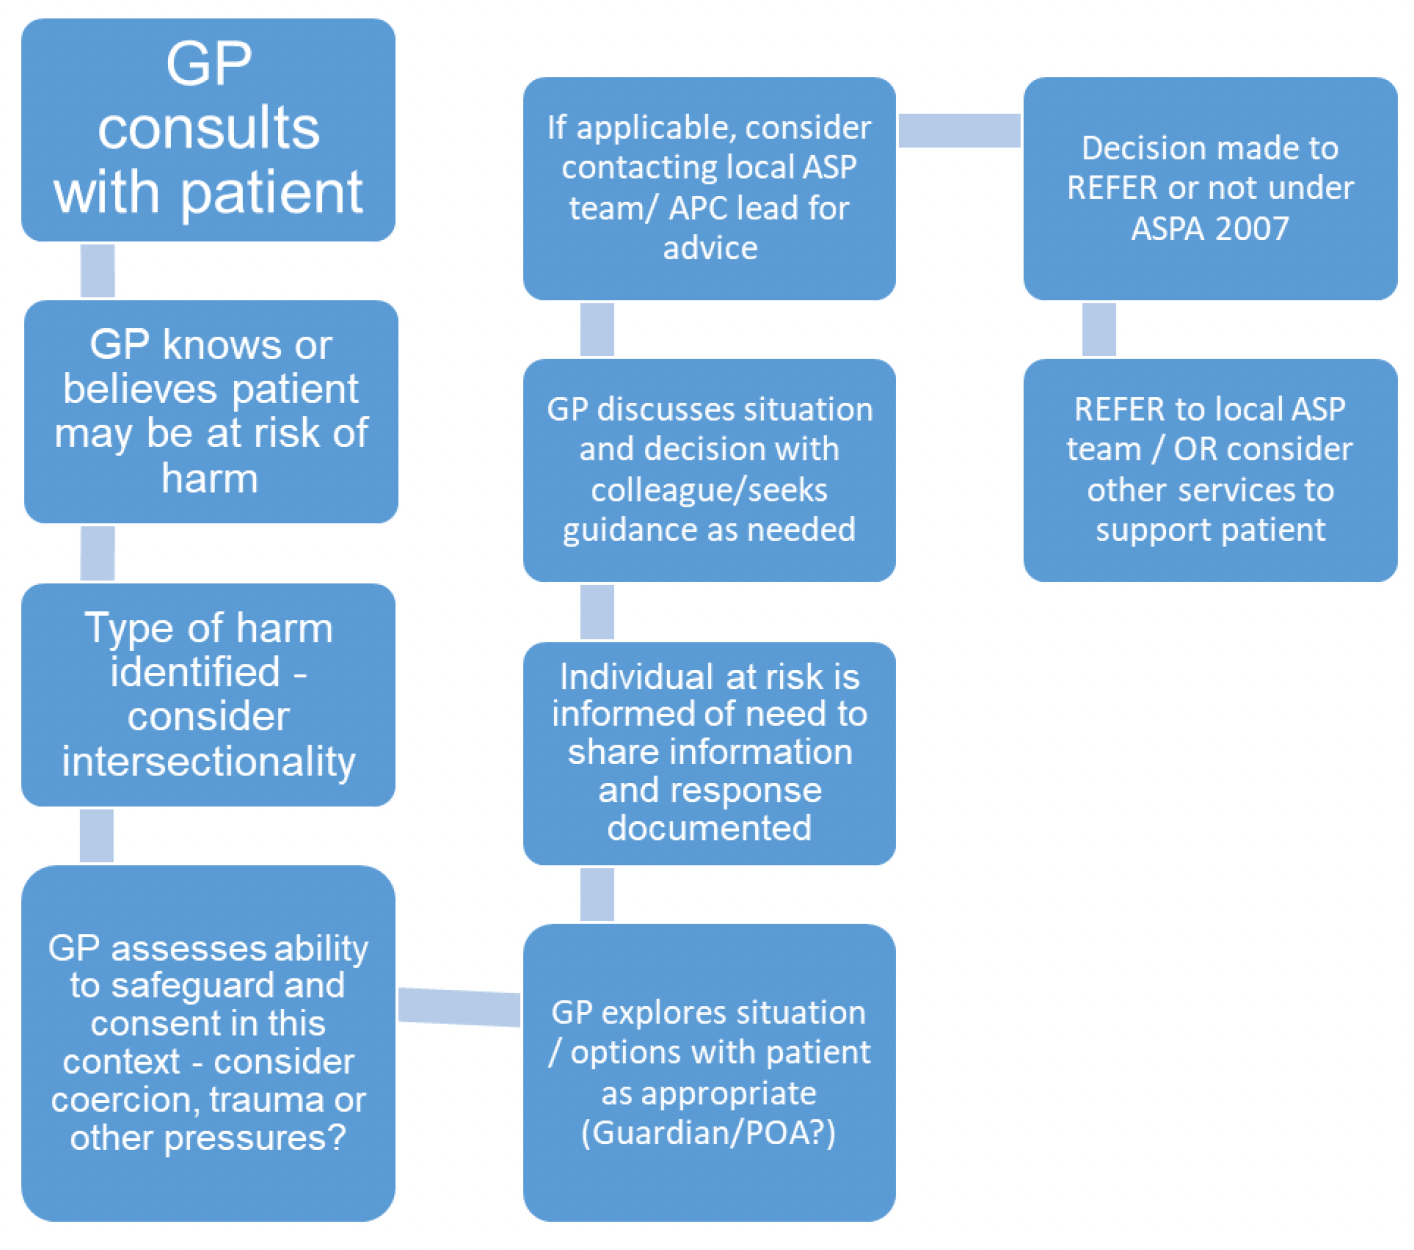 Flowchart showing the journey from consultation to referral

First the patient consults with the GP or medical practitioner; the GP believes the patient may be at risk of harm; then from what the GP hears and sees from the patient, they identify the type of harm present; the professional then assess whether they believe the patient is able to safeguard themselves or if they are experiencing coercion, trauma or other outside pressures which may prevent them being able to safeguard theselves;  GP explores the situation more fully with the patient and discusses options; patient at risk of harm is informed that the GP needs to share relevant information about them and patient's response to this must be recorded; the GP should discuss the situation with their colleague or seek further guidance as appropriate; if required the GP may decide to contact their local Adult Support and Protection team/APC lead for advice; GP makes the decision whether to make an ASP referral or not; if the patient is believed to be at risk of harm a referral should be made and/or other support services cconsidered.  